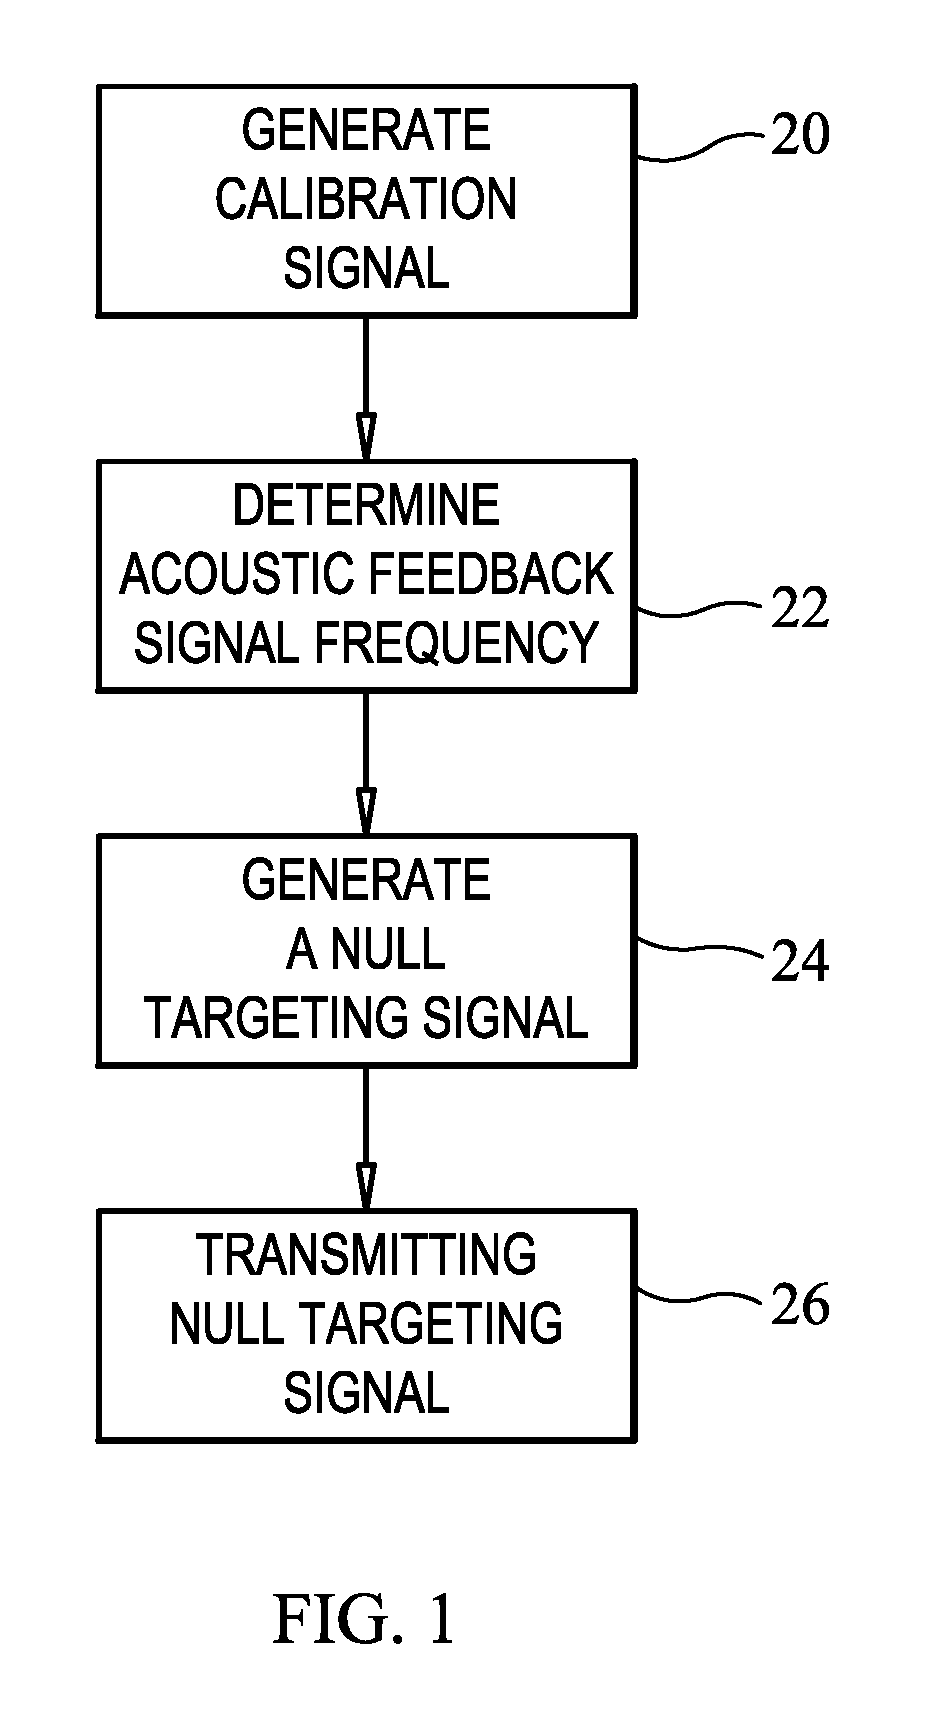 Apparatus, System and Method for Reducing Acoustic Feedback Interference Signals